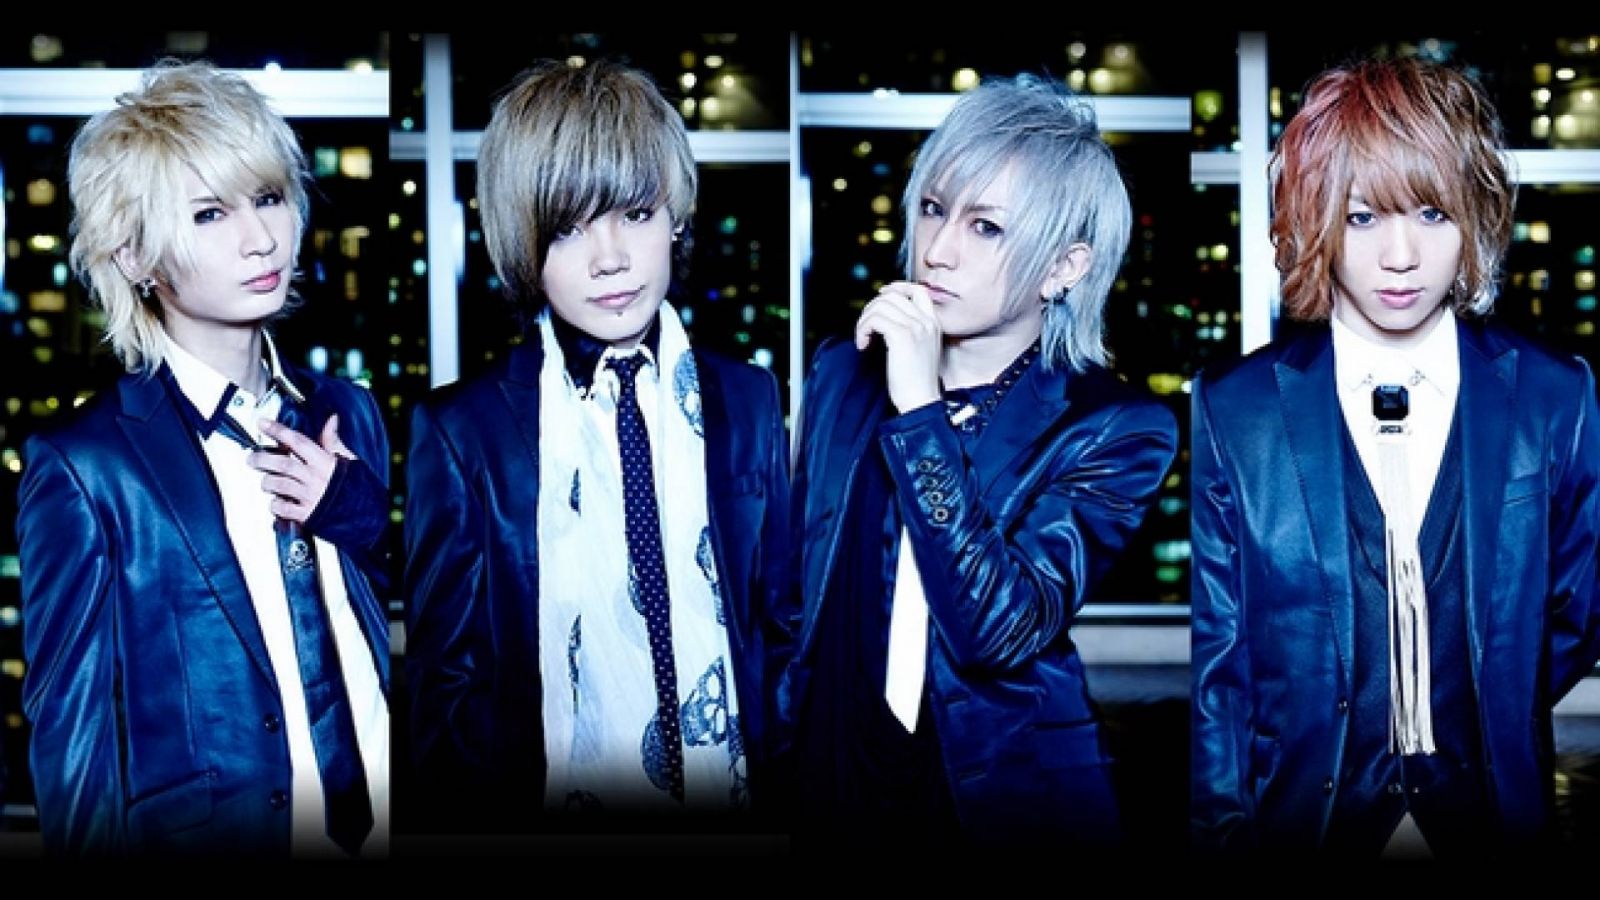 Musical Guests for Anime North 2014 © Beyond-MAX, Inc. & DaizyStripper